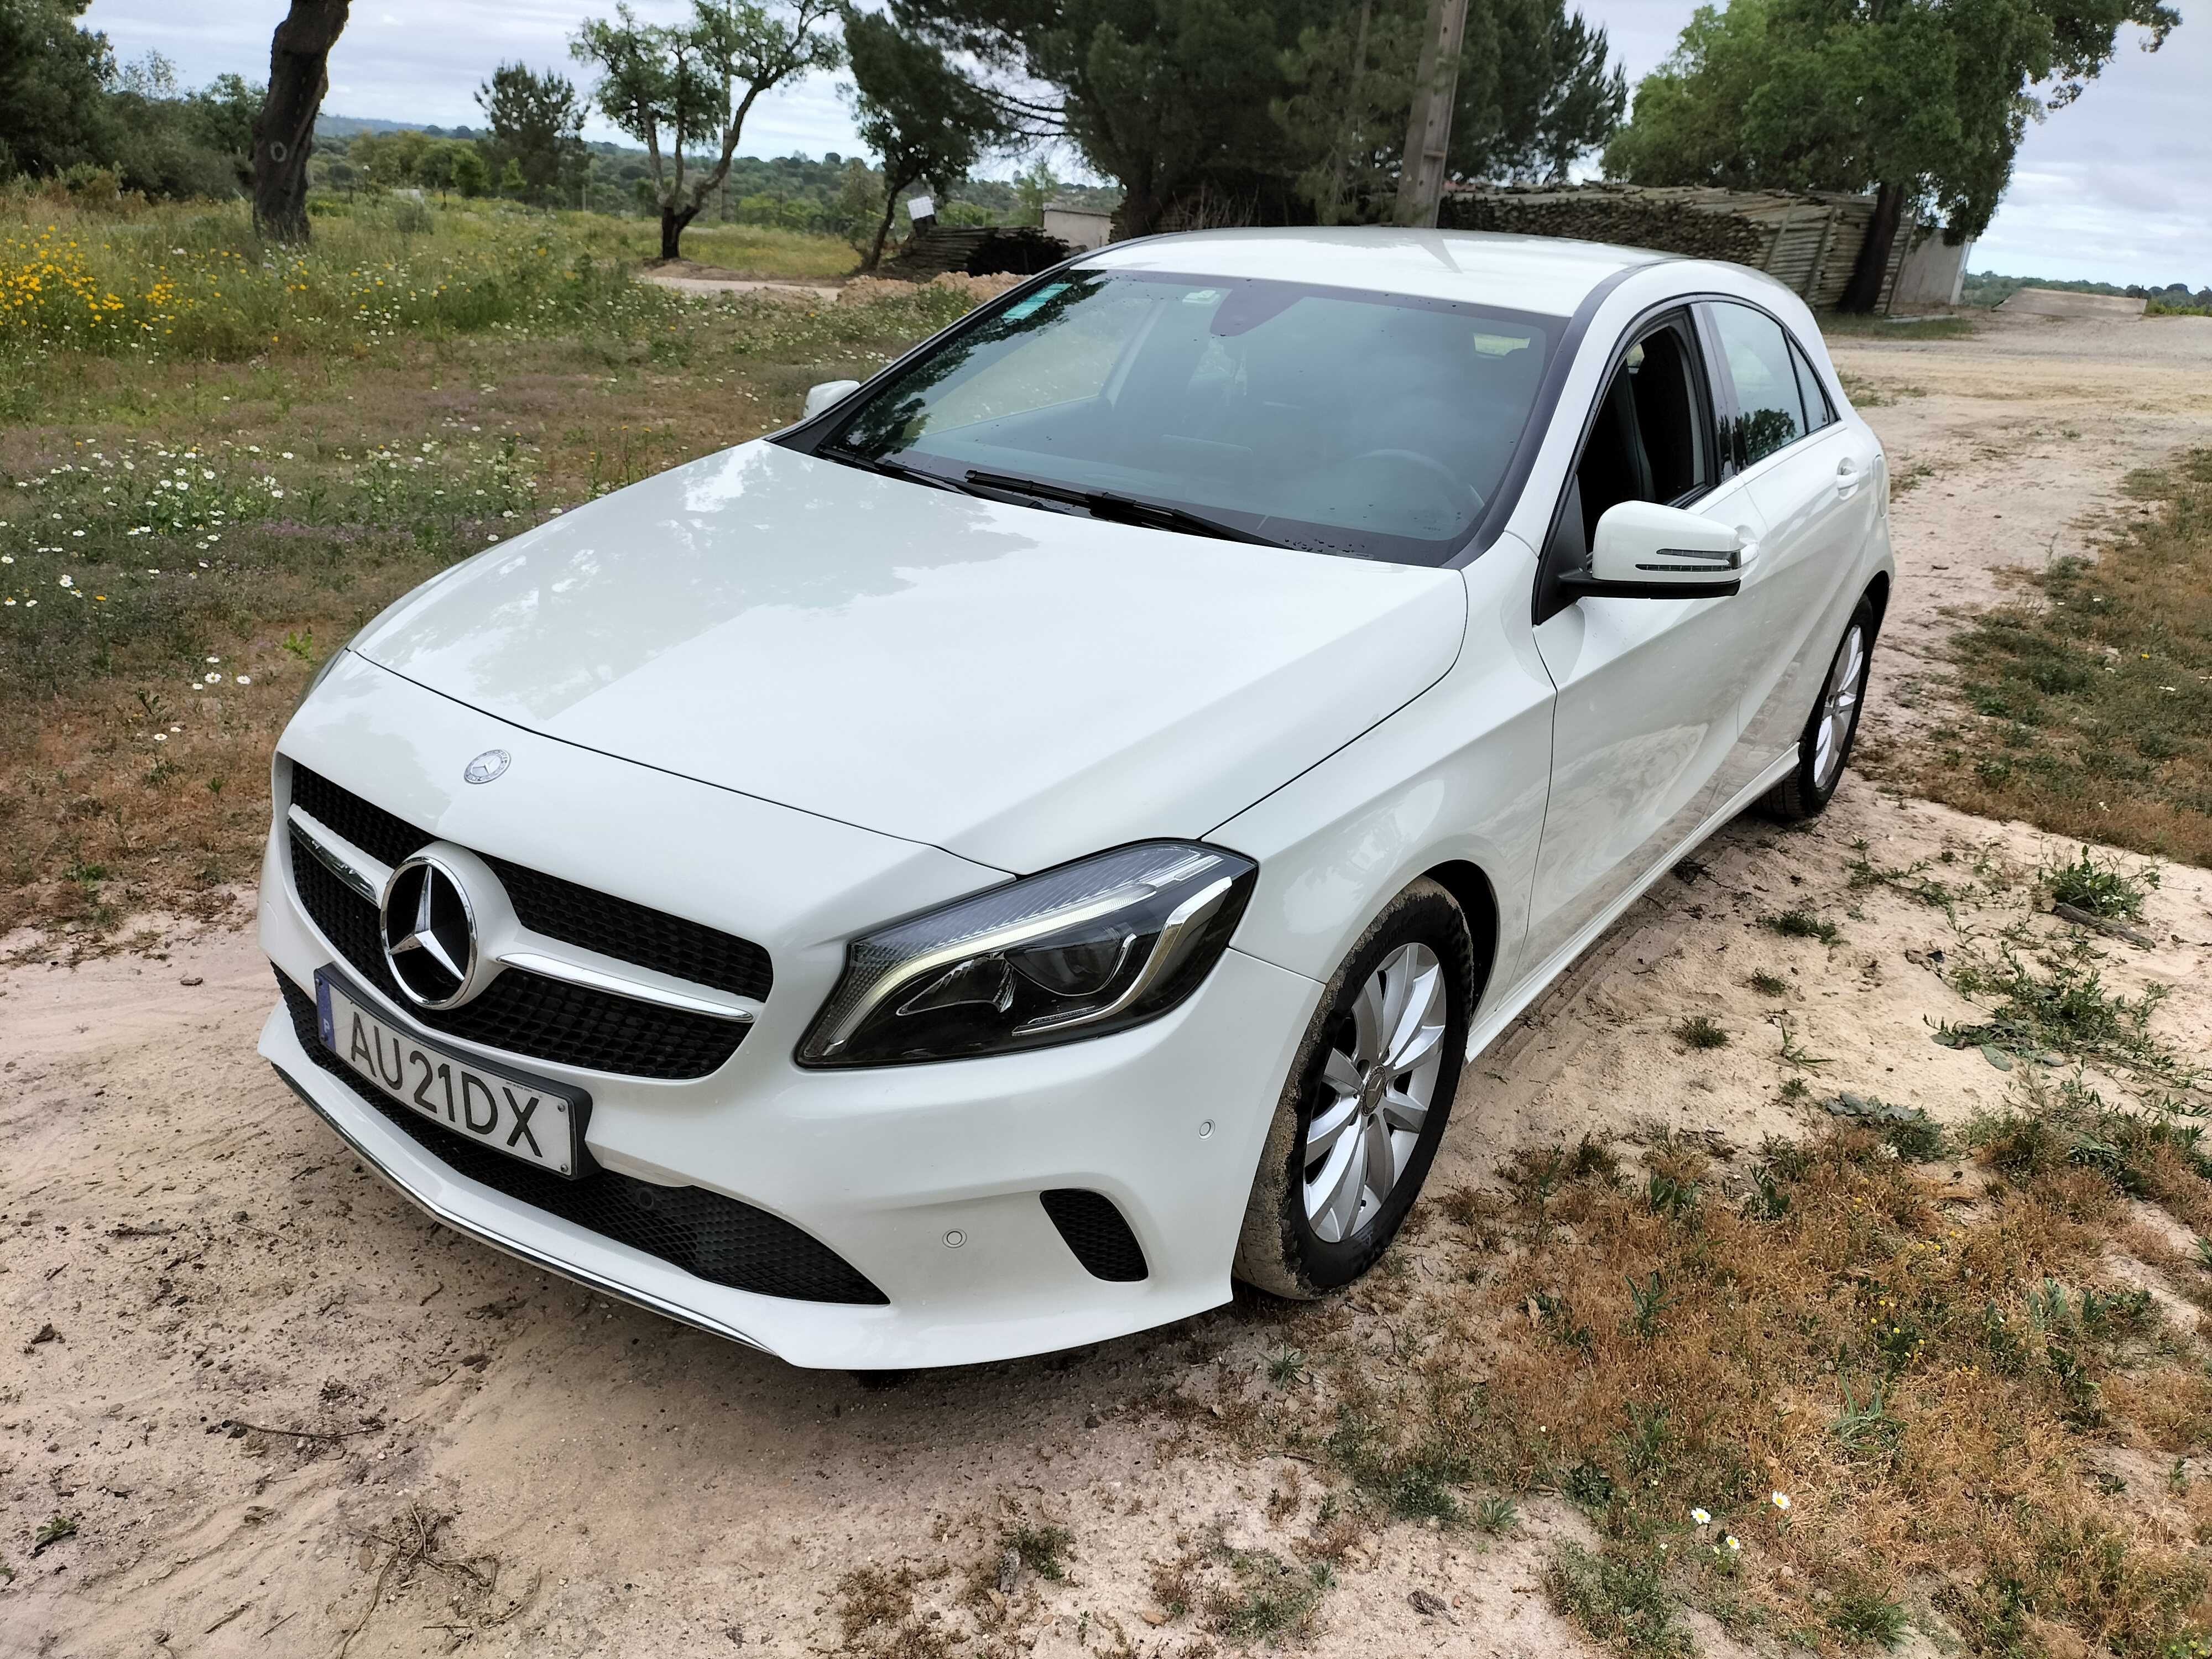 Mercedes classe A 180 BlueEdition 2016/06